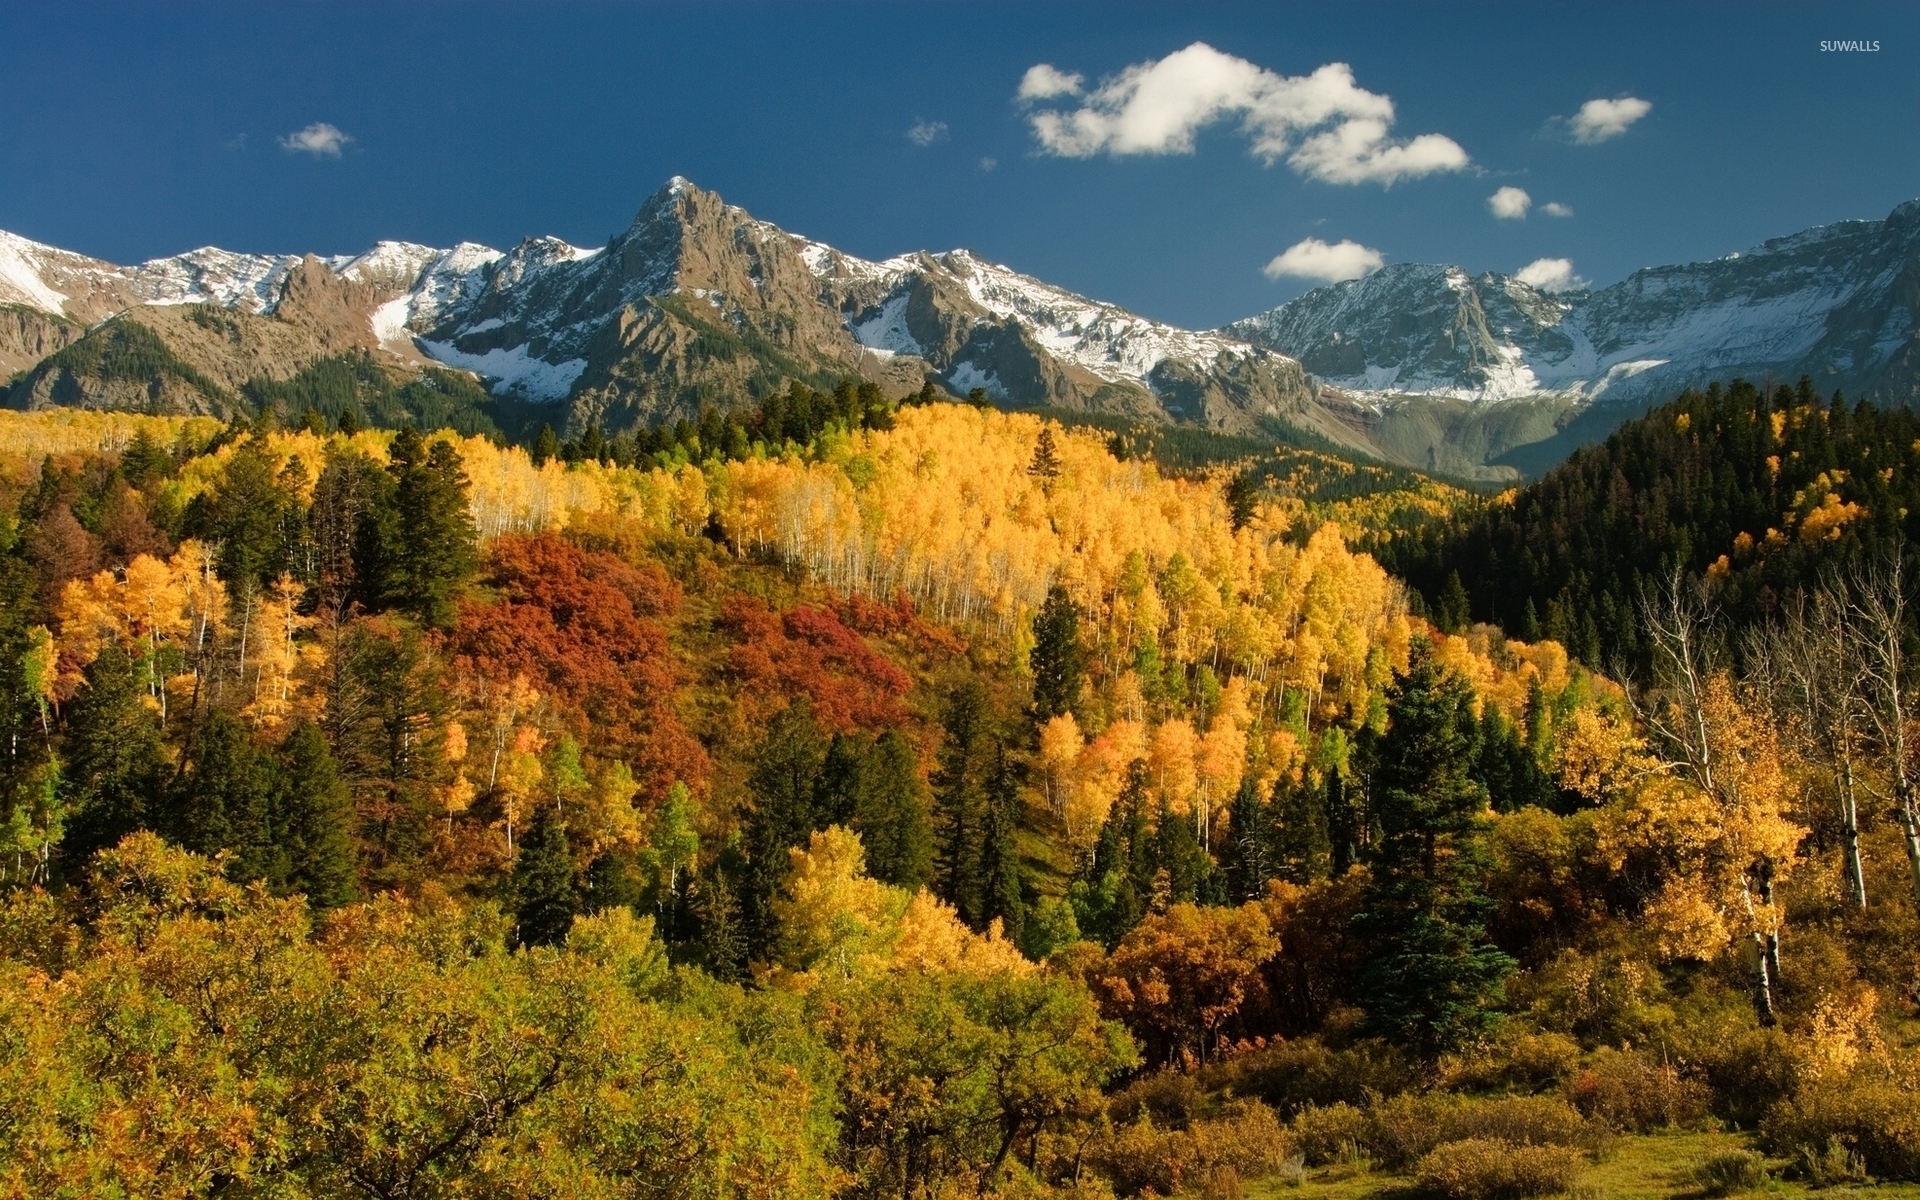 Autumn forest by the snowy peaks wallpaper - Nature wallpapers - #35882